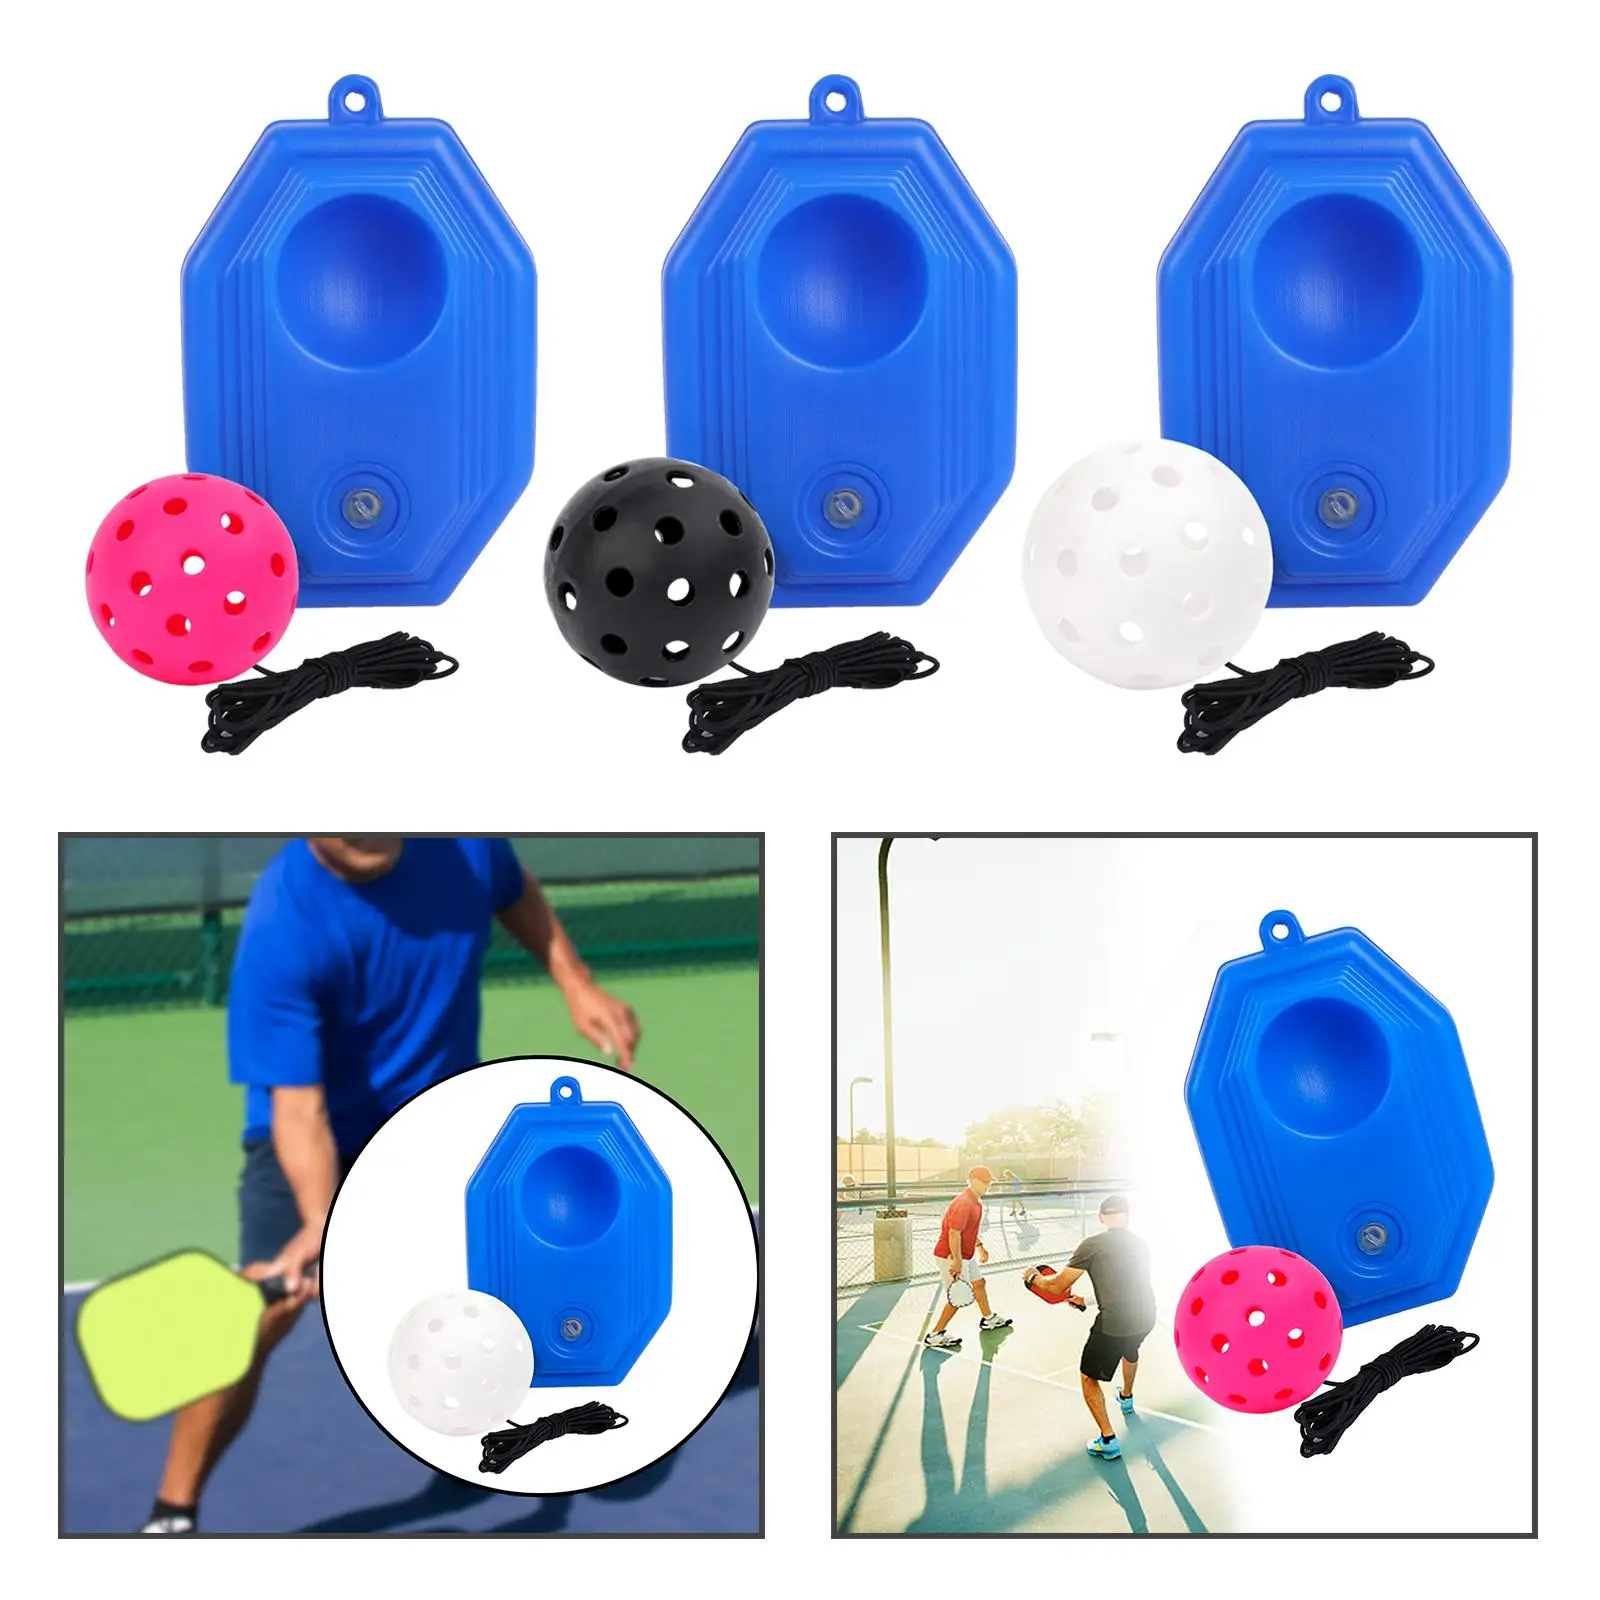 Pickleball Trainer Portable with 40 Holes Pickleball Ball Pickleball Rebounder for Exercise Tool Beginners Practice Kids Adults